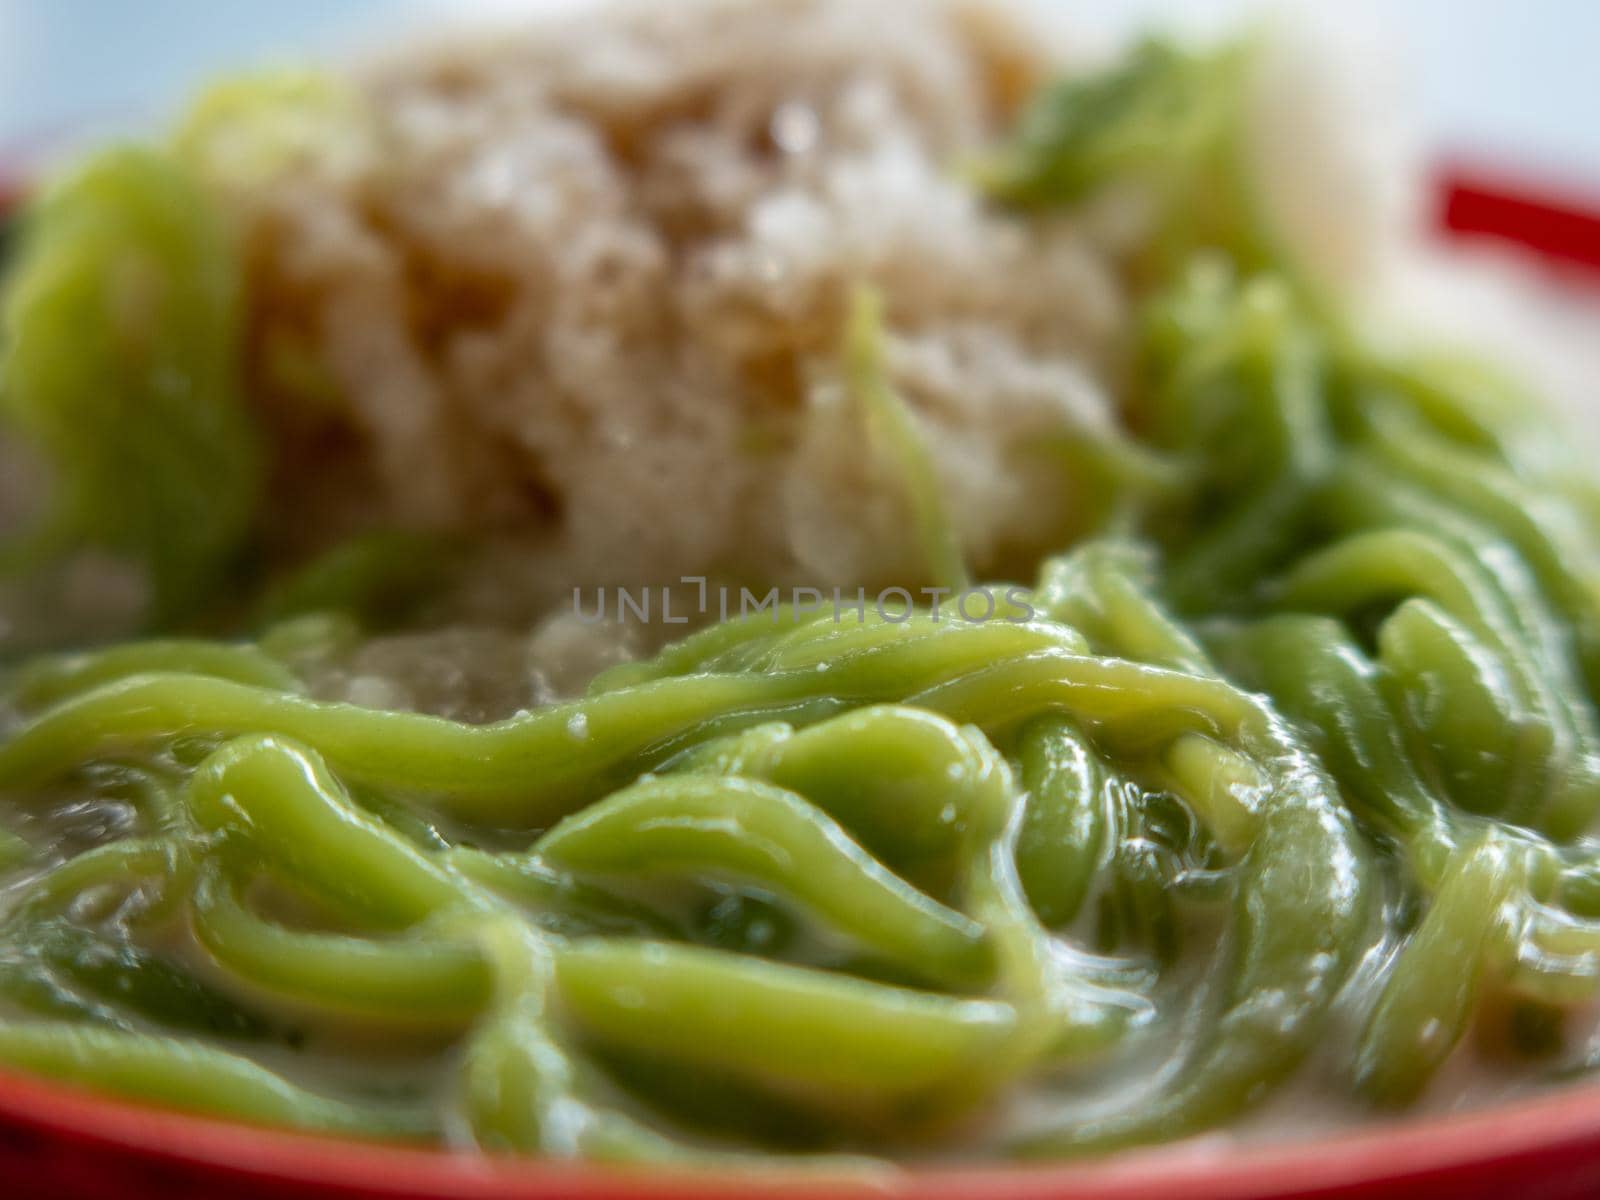 Malaysian Favourite Cocktail Drink - Cendol by azamshah72